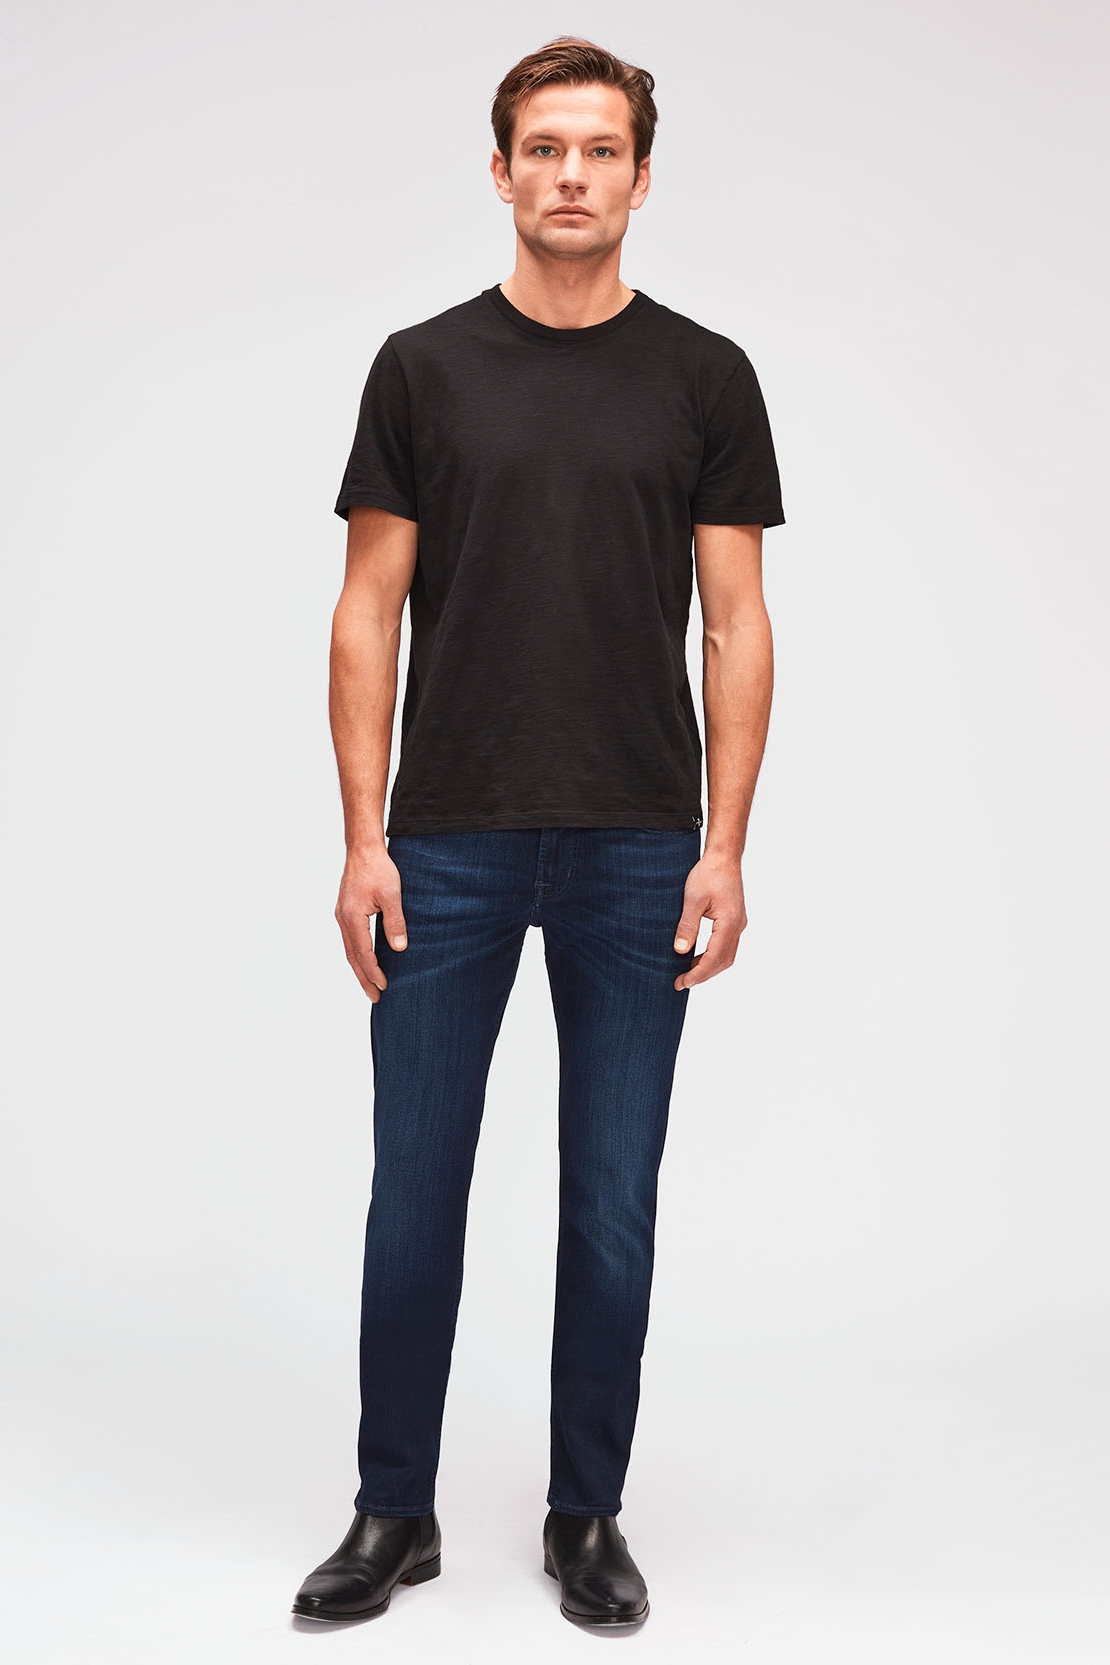 Mens Jeans 7 For All Mankind Jeans 7 For All Mankind Cotton Paxtyn Tapered Luxe Performance Plus In in Black Blue for Men 